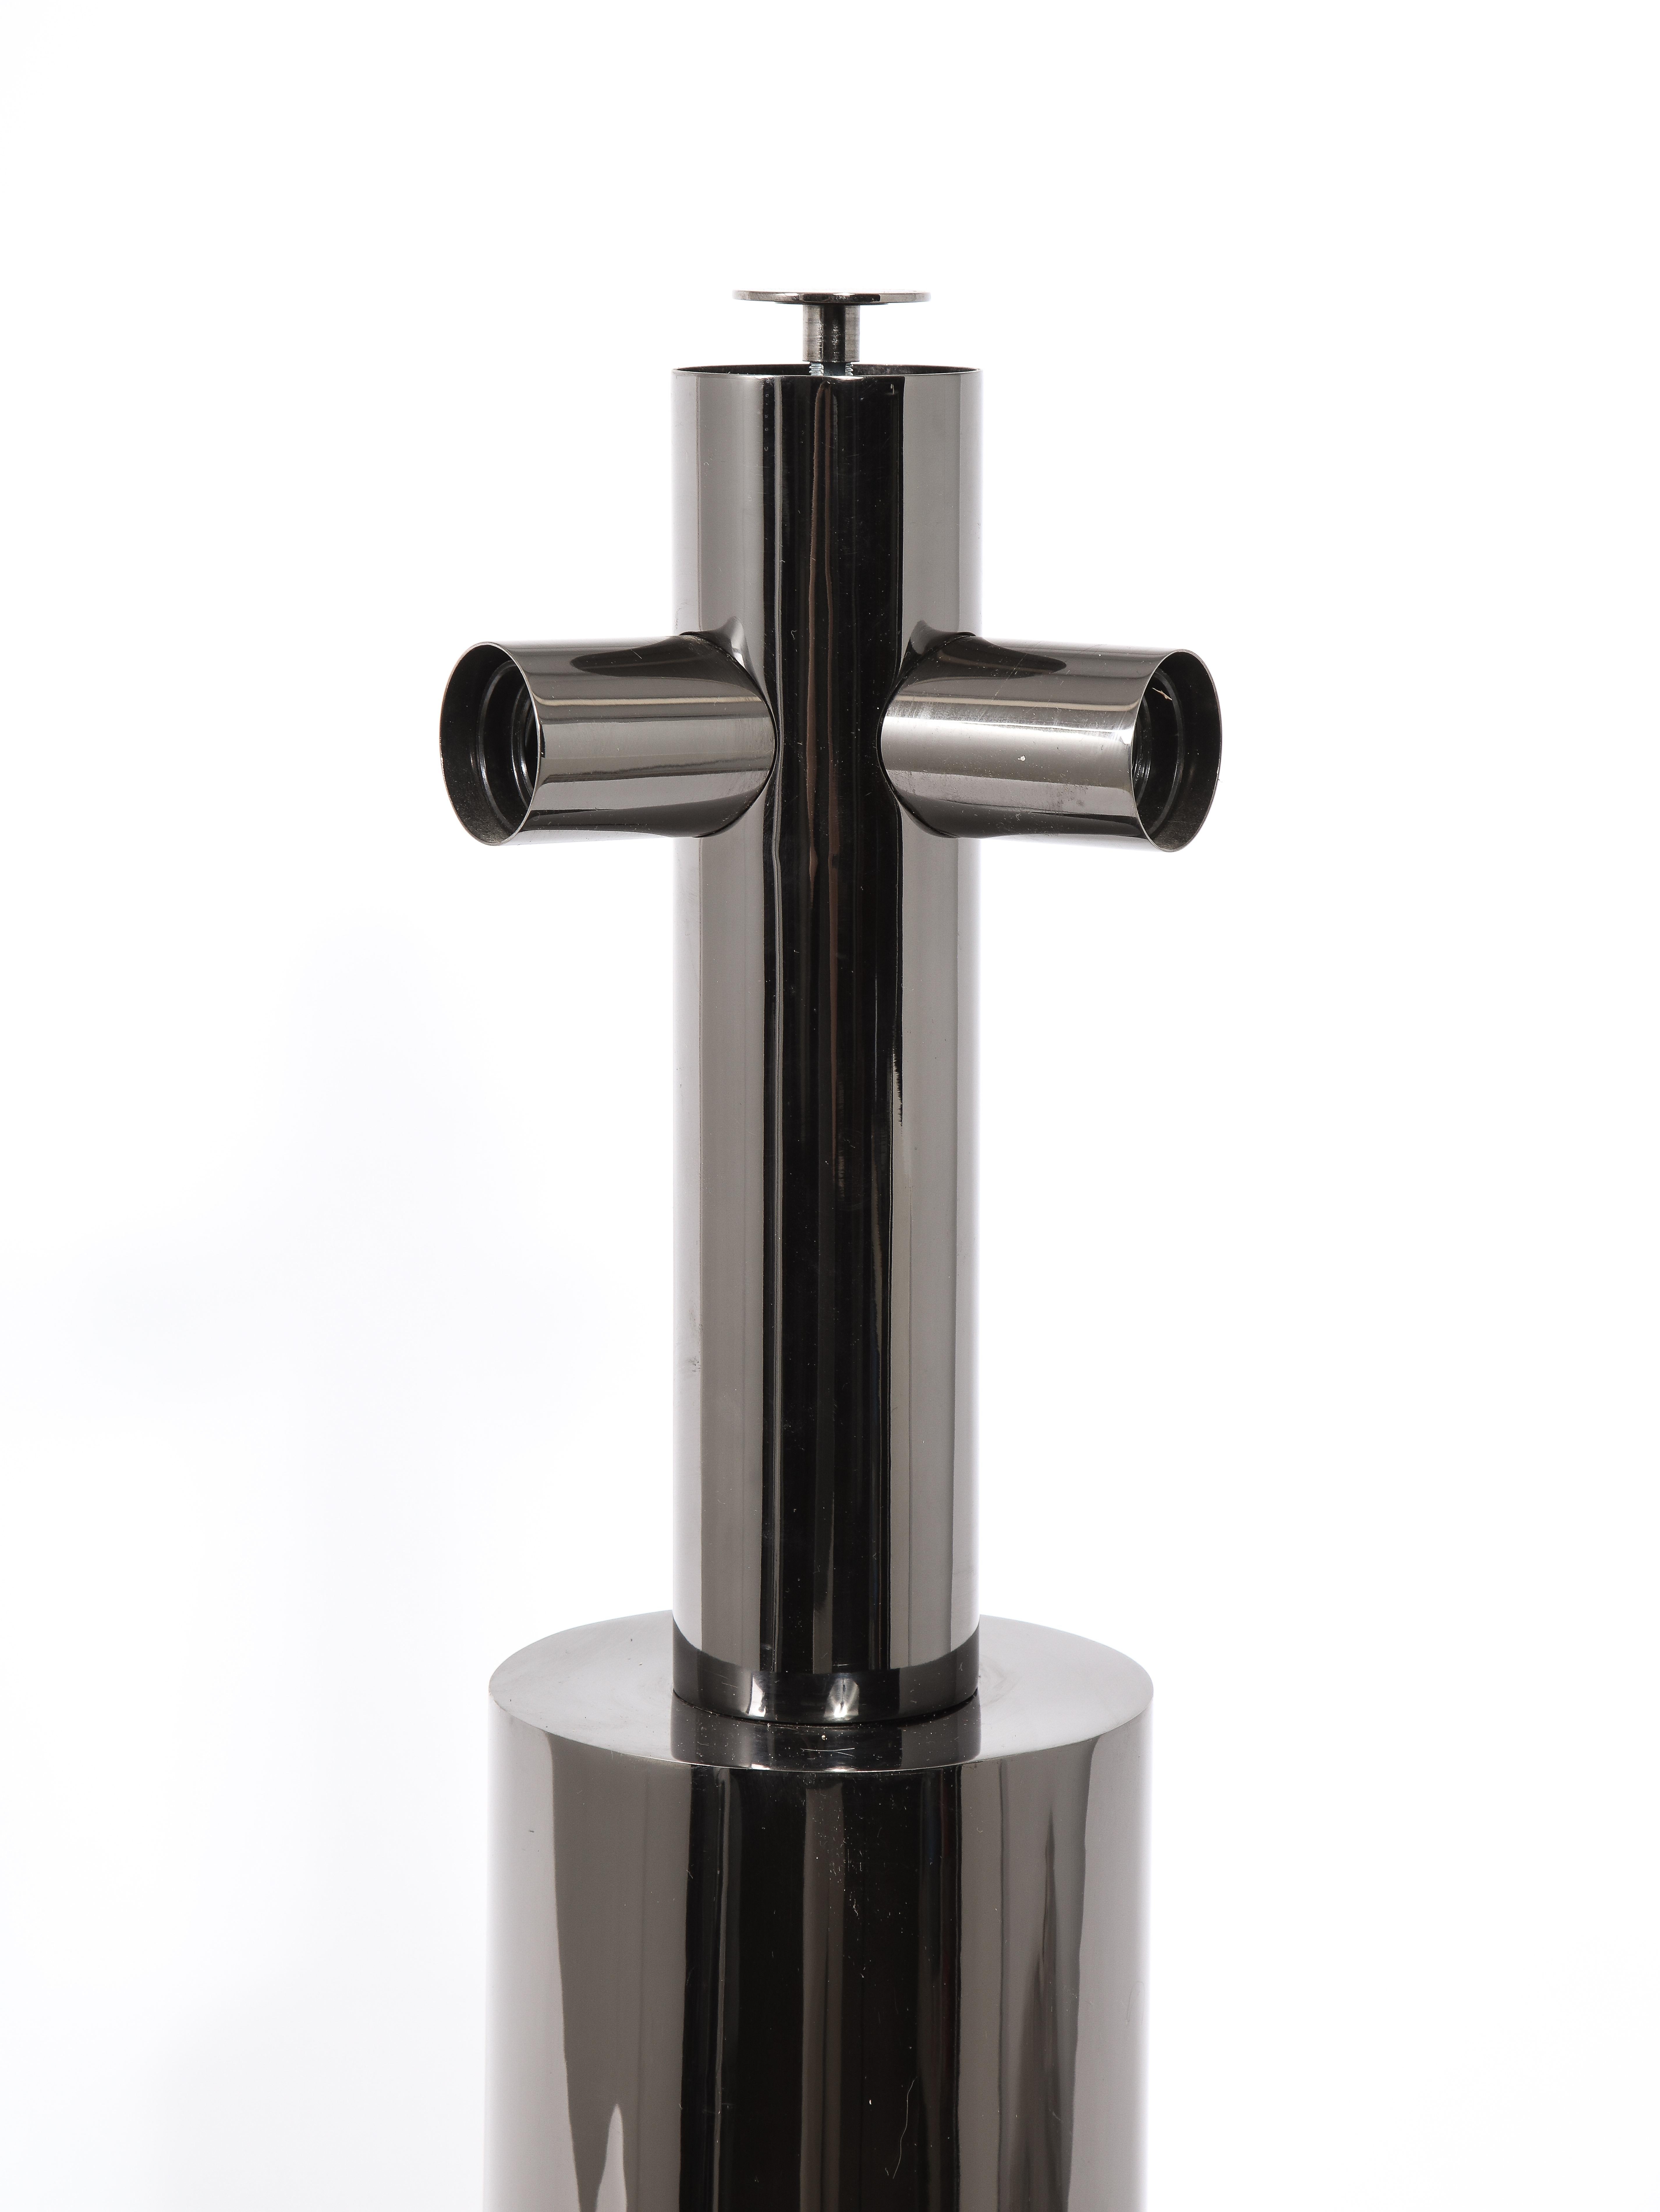 Brass Cylindrical Table Lamp in Black Nickel, France, 1970's For Sale